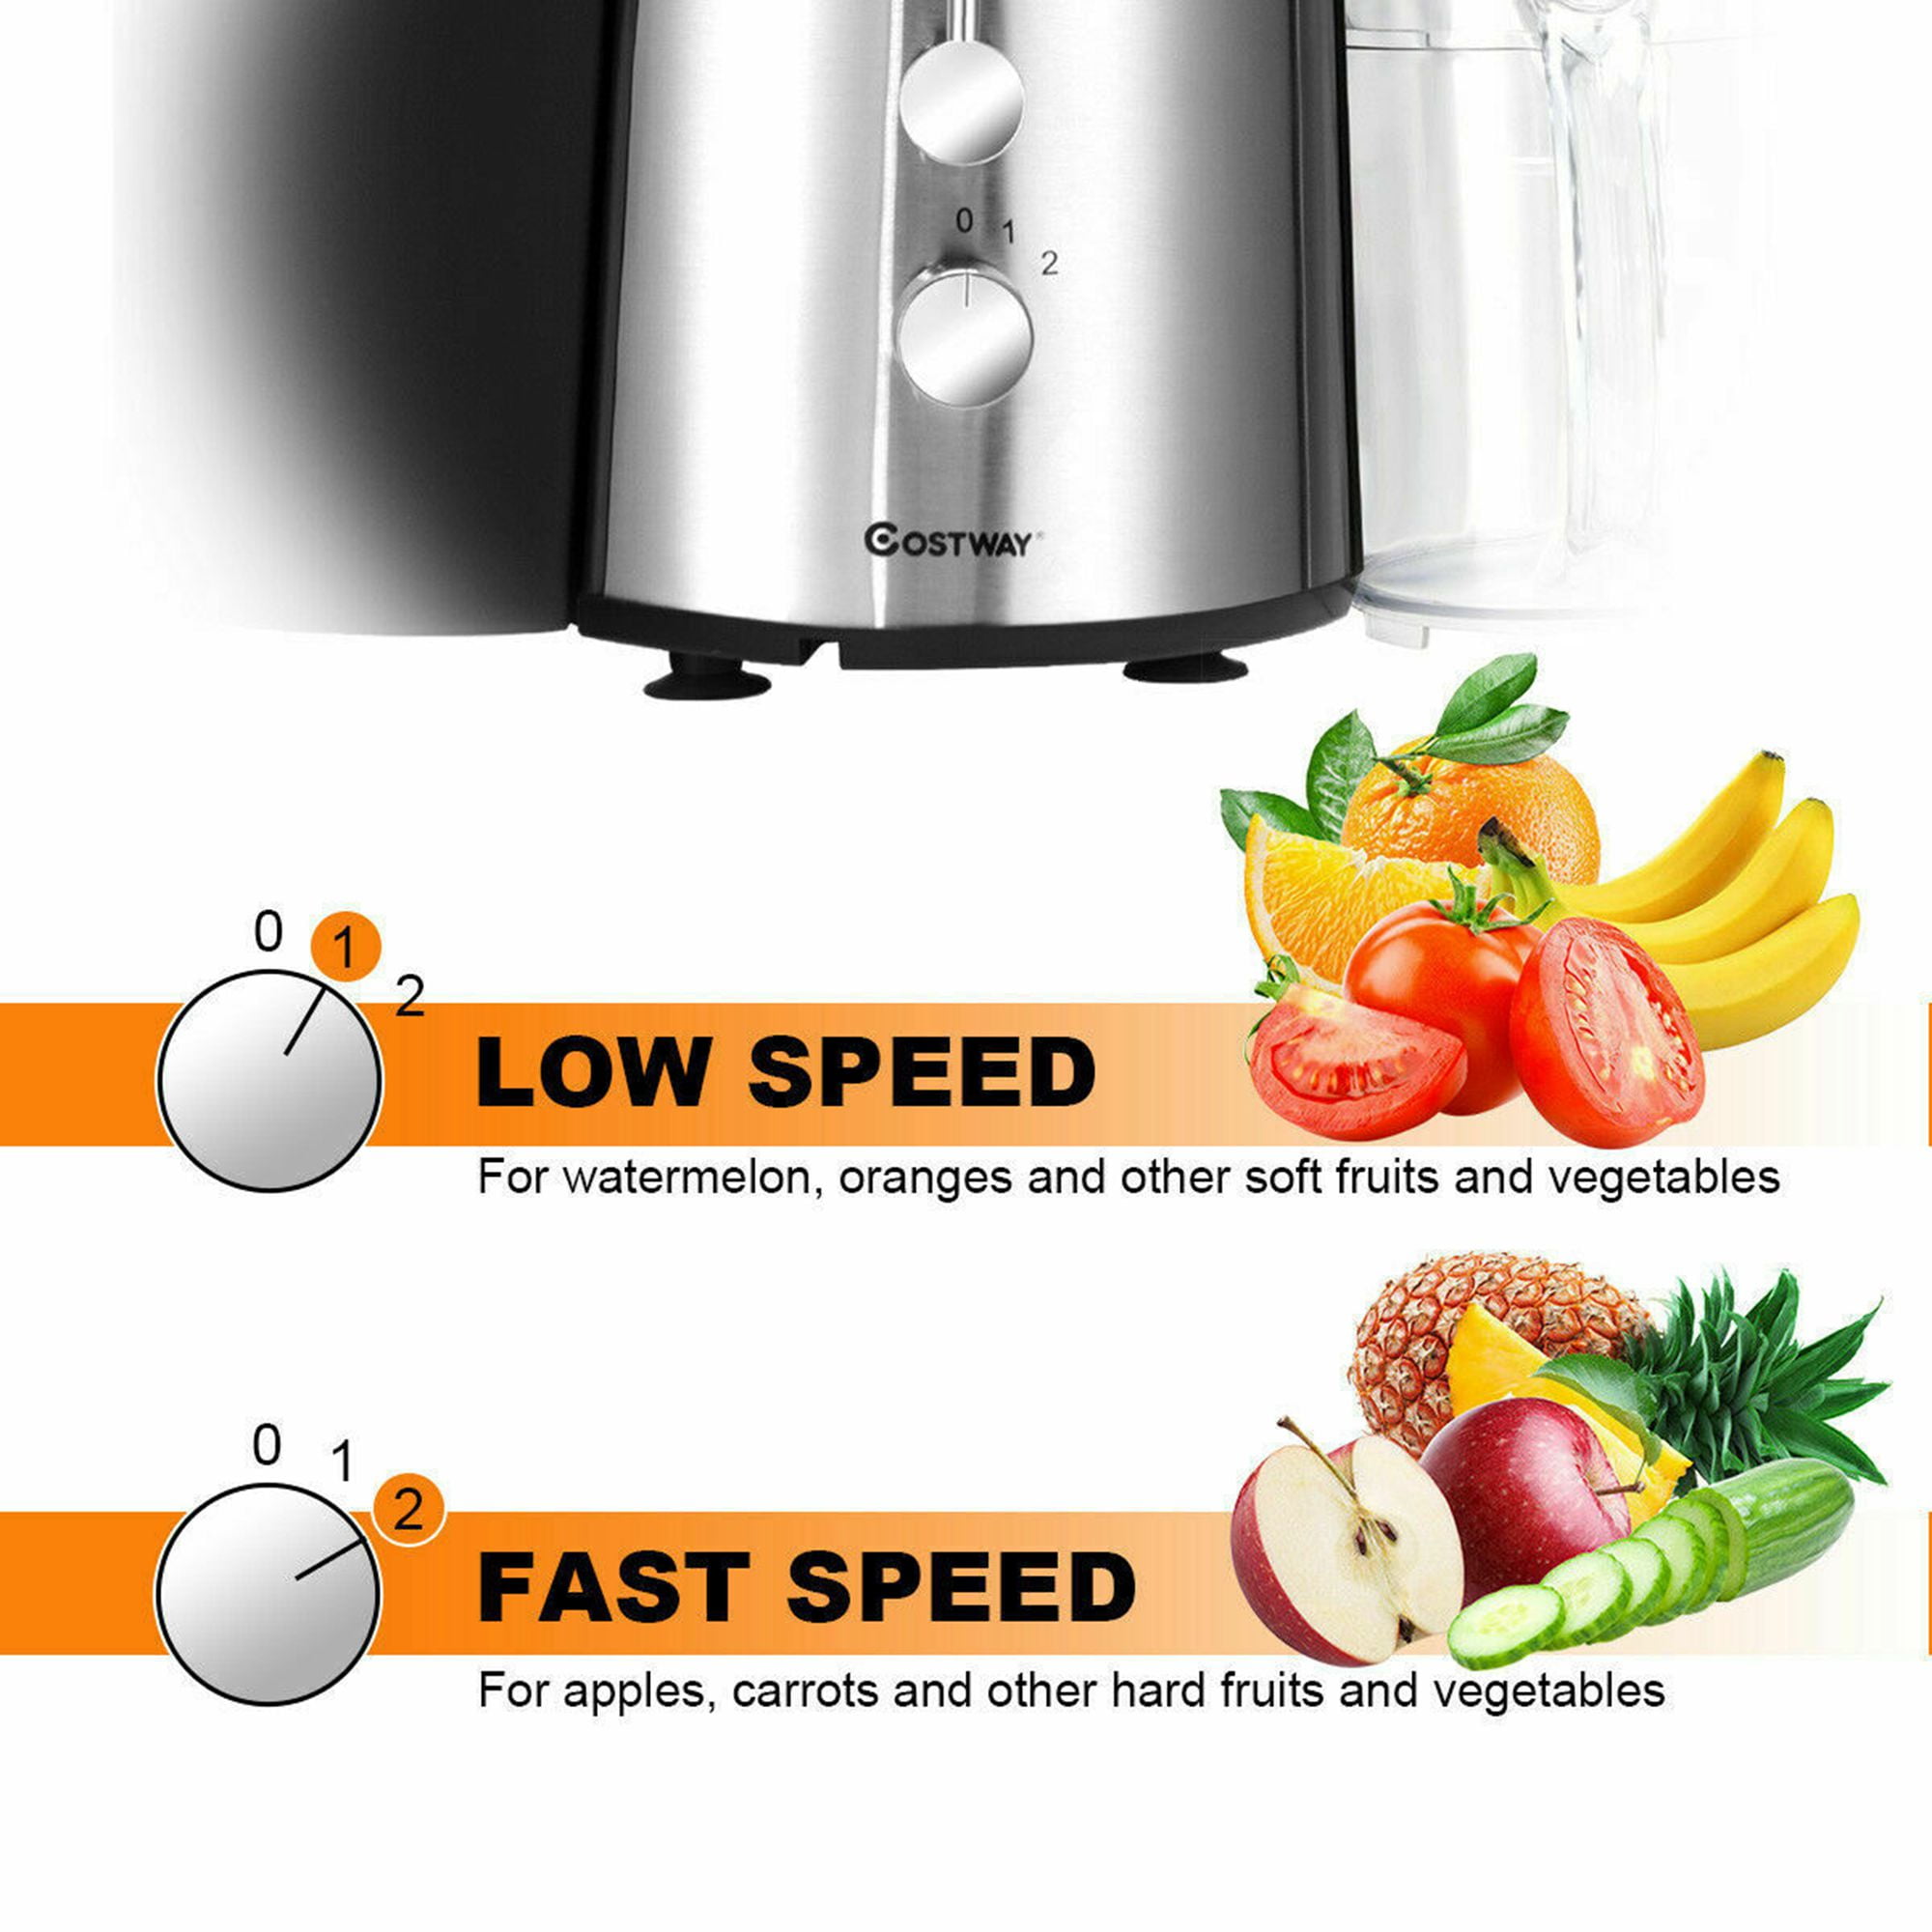  COSTWAY Electric 5-in-1 Professional Food Processer and Juicer  Combo, 800W Powerful Motor with 2-Speed, Food Grade Material includes Wide  Mouth Centrifugal Juicer, Smoothie Blender, Blender, Chopper Grinder, Meat  Grinder and Dough